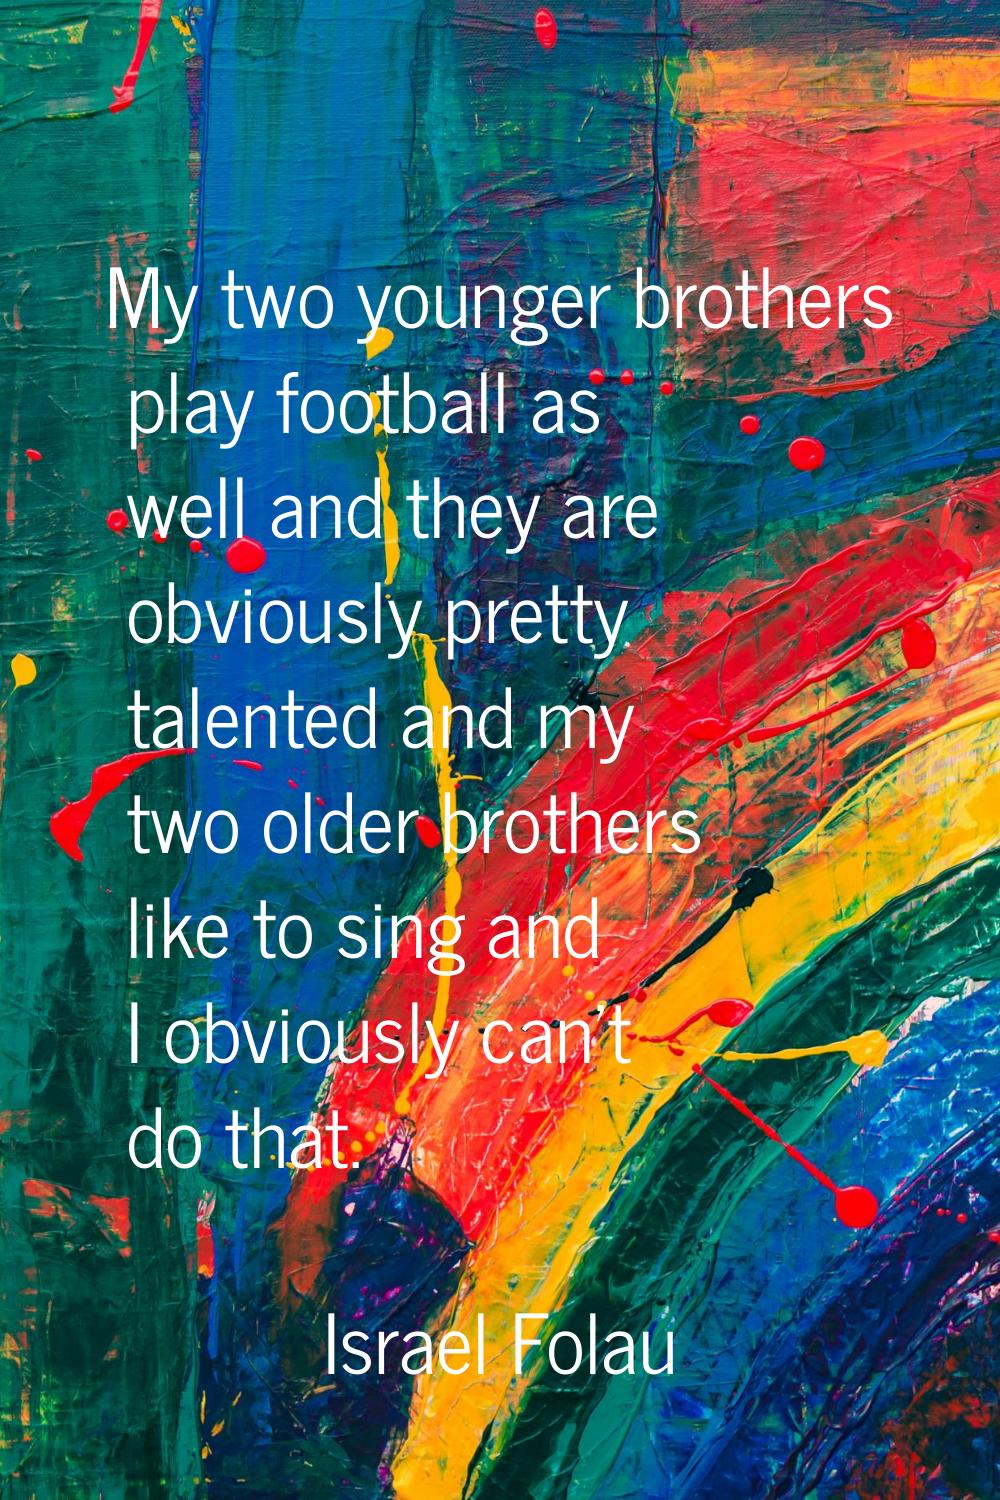 My two younger brothers play football as well and they are obviously pretty talented and my two old